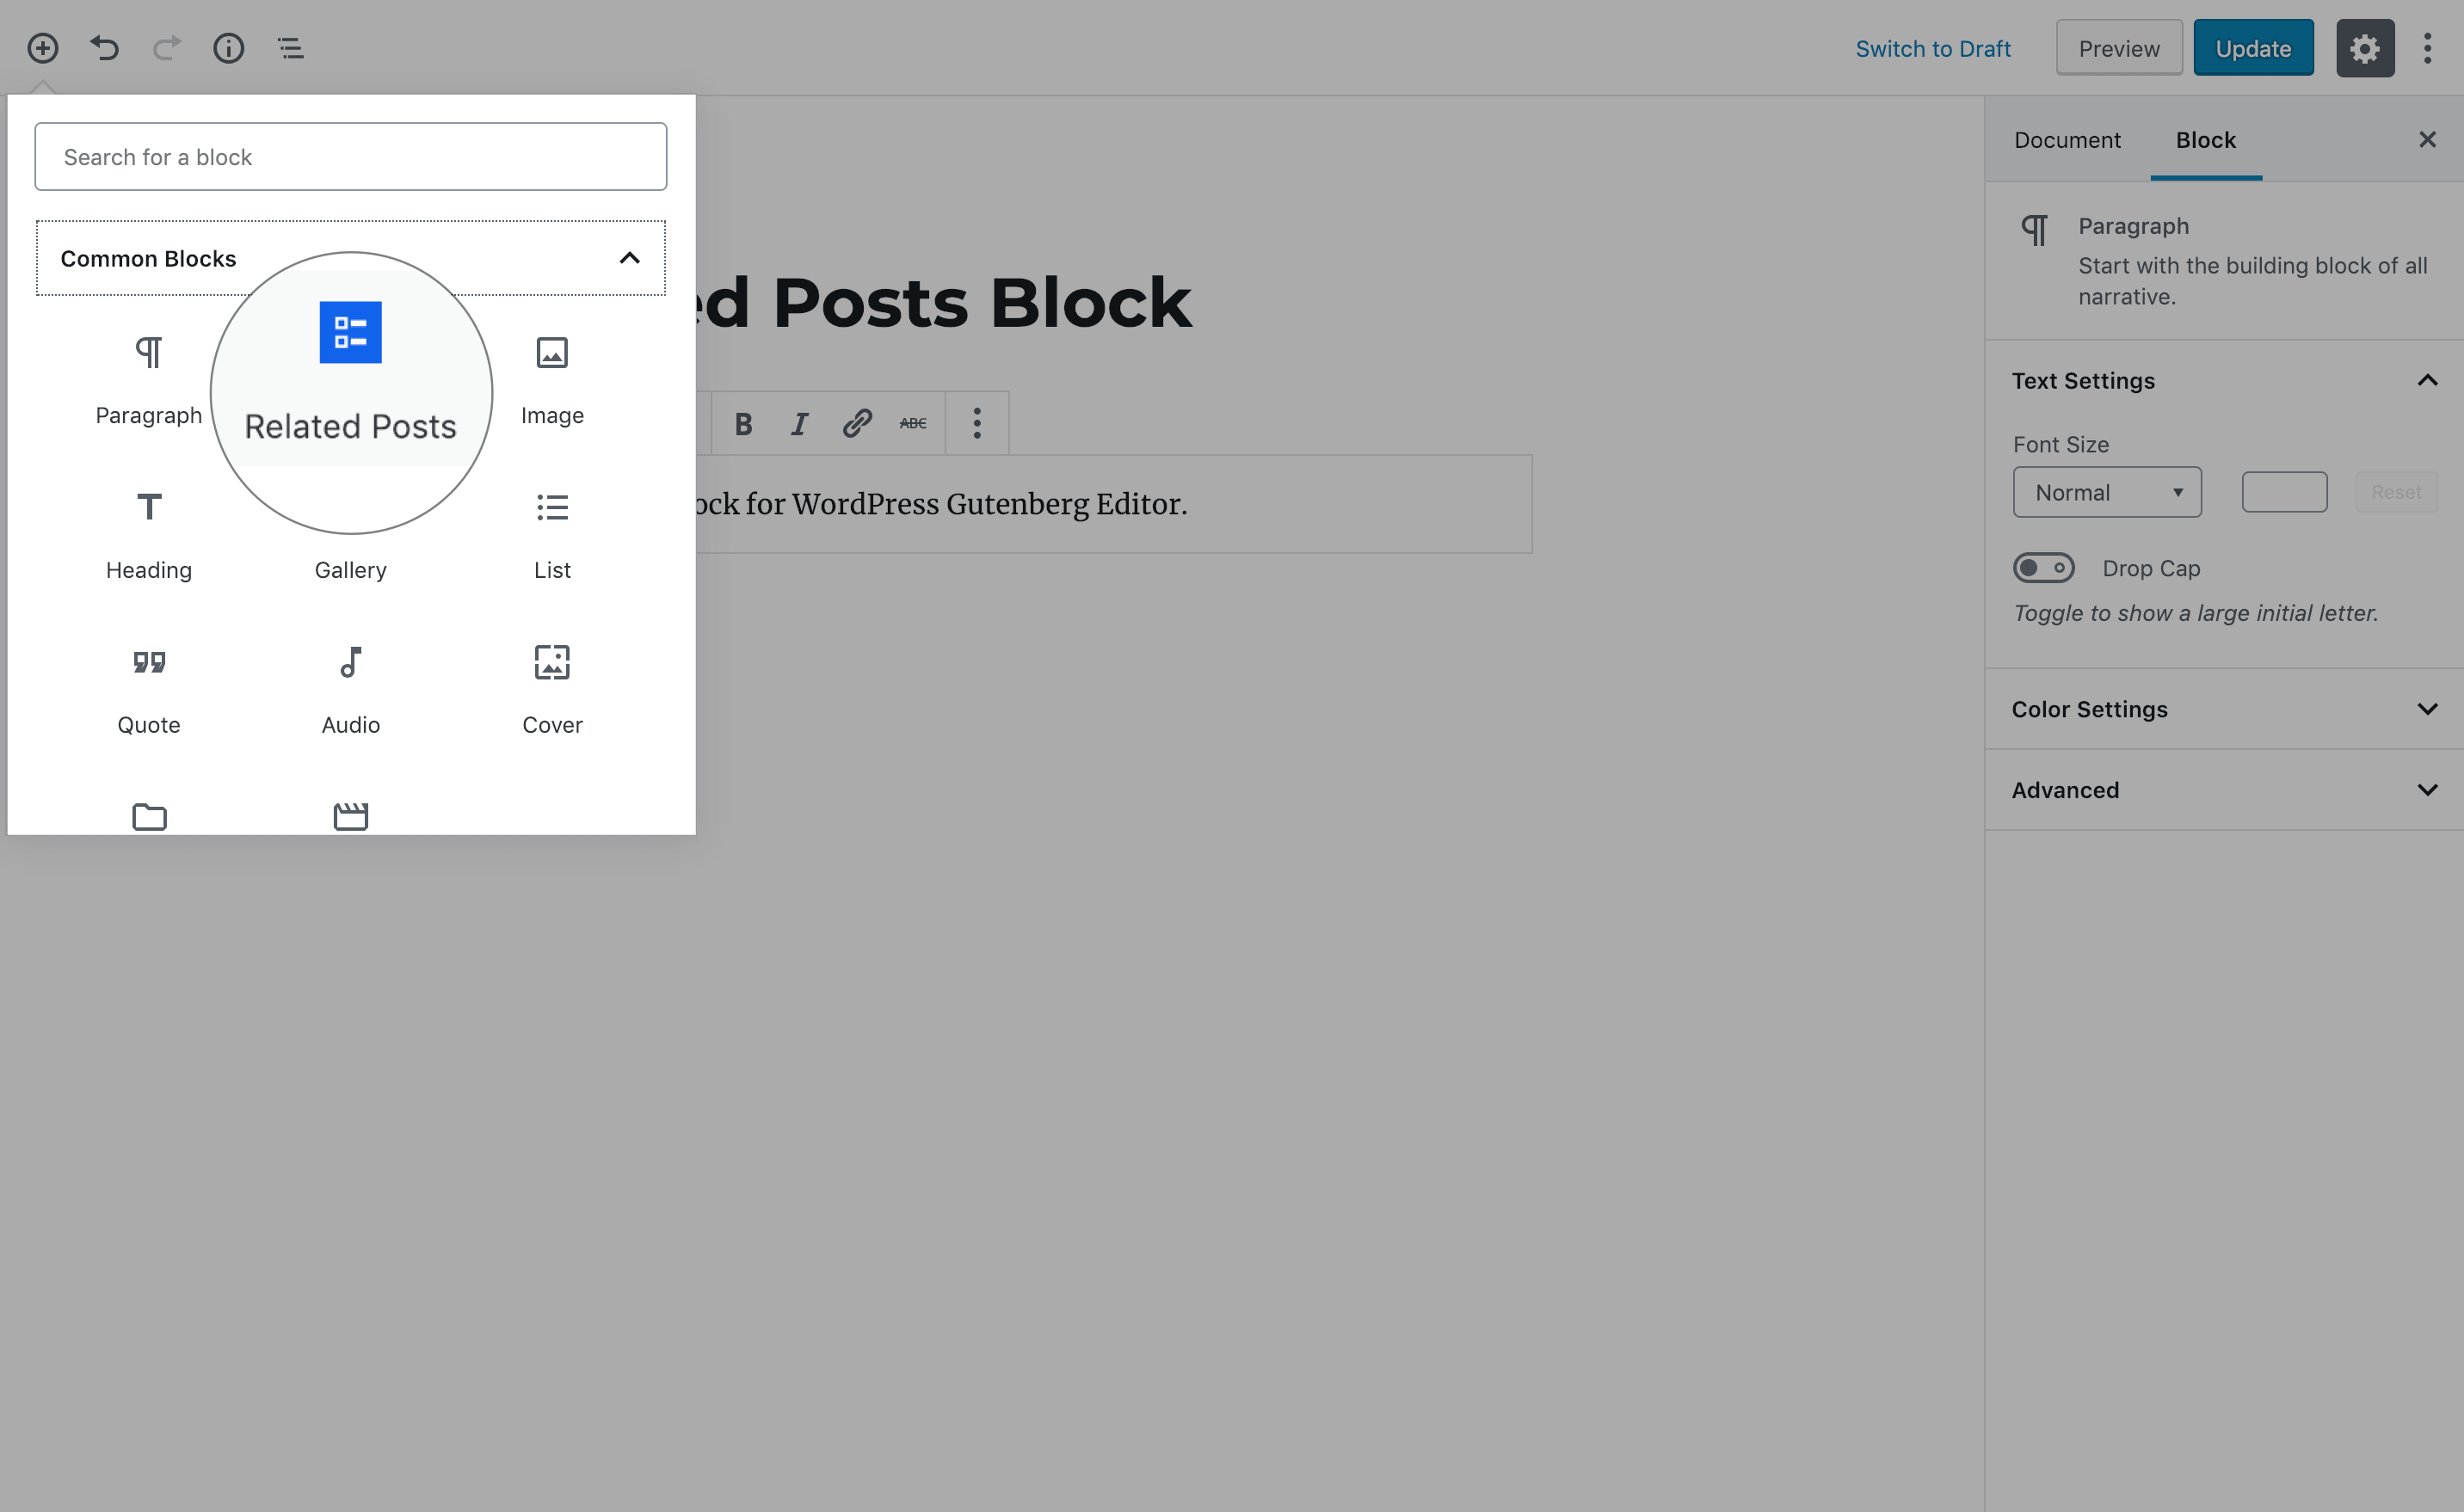 Add "Related Posts" Block from "Common Blocks".